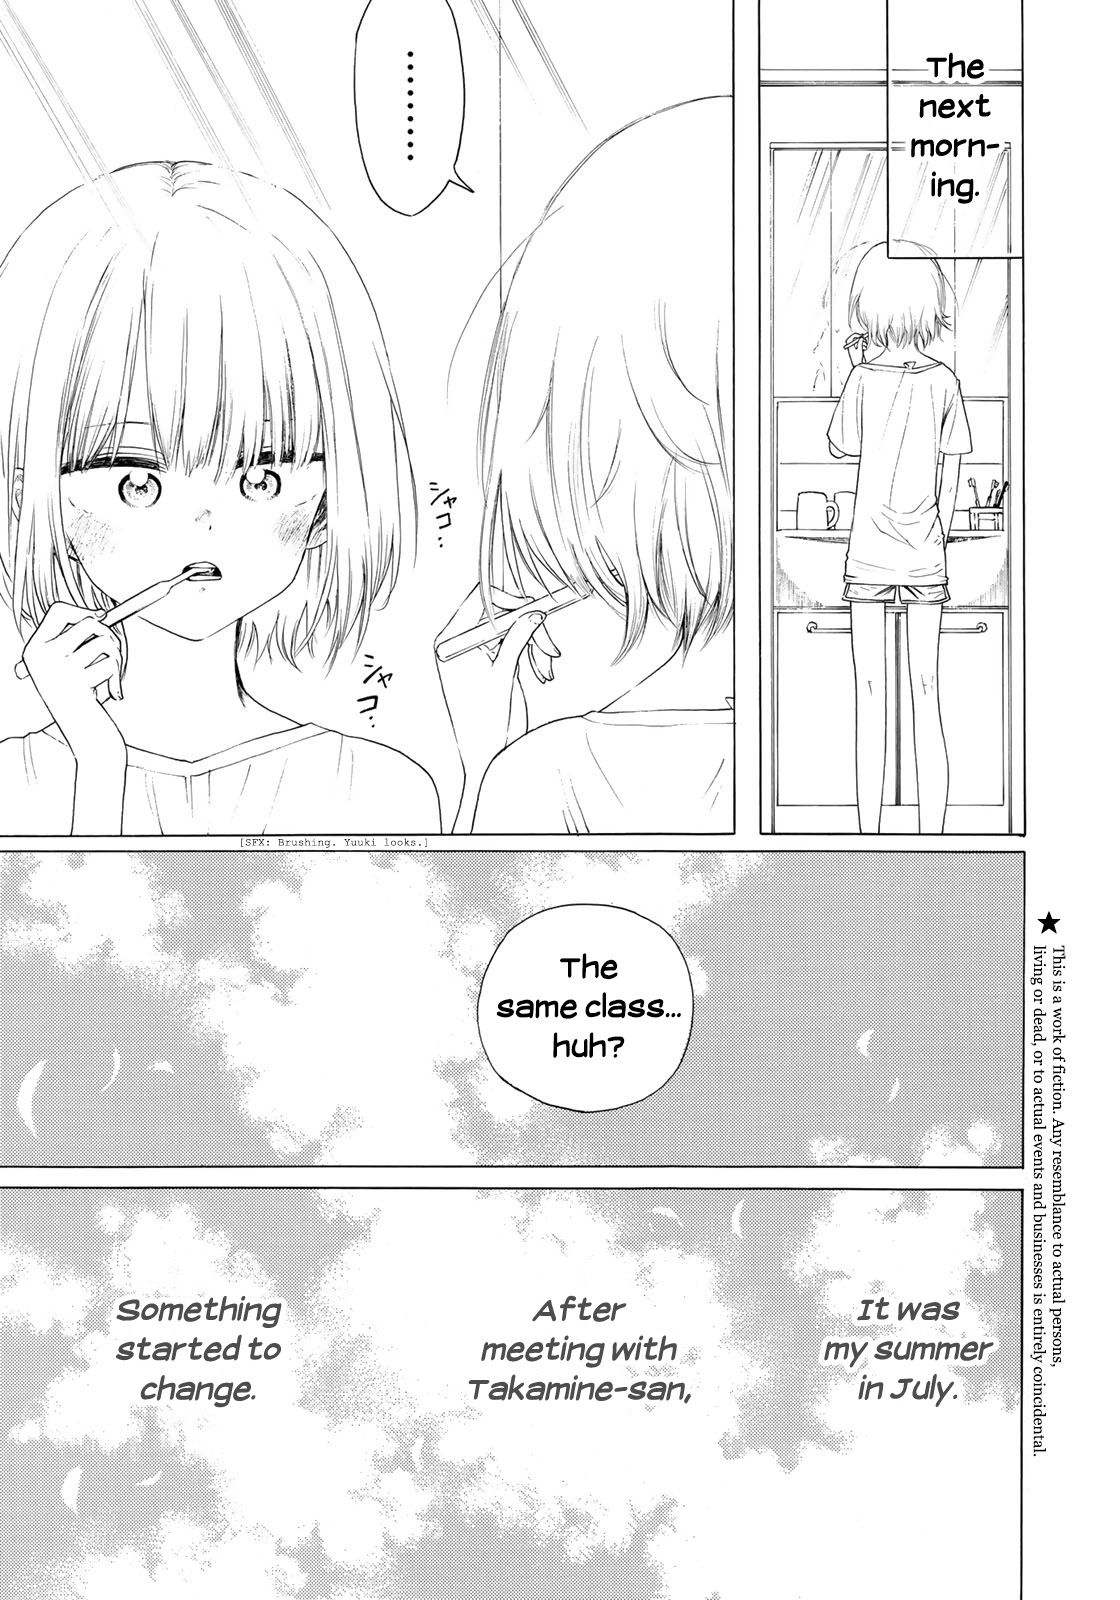 Looking Up to You Vol. 1 Ch. 8 I Want to Change